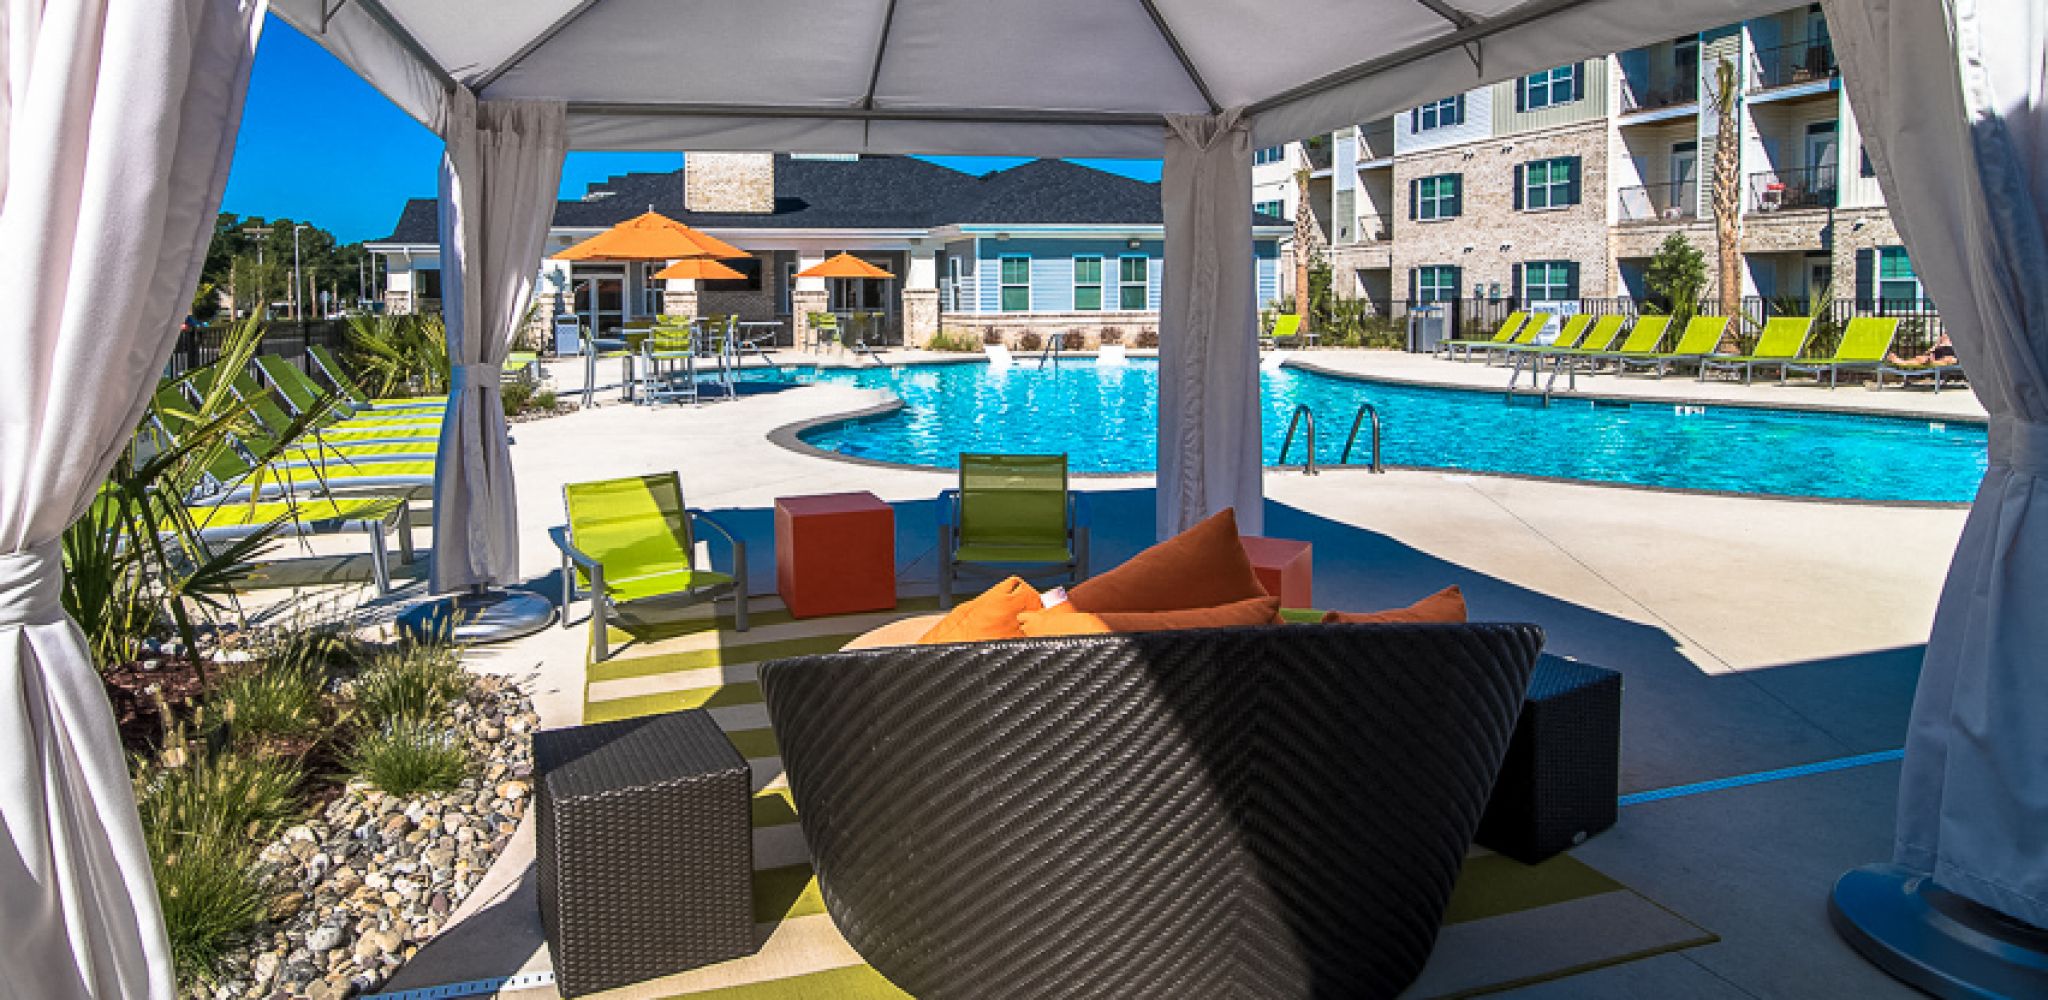 Hawthorne at Leland luxury outdoor pool with shaded lounge area